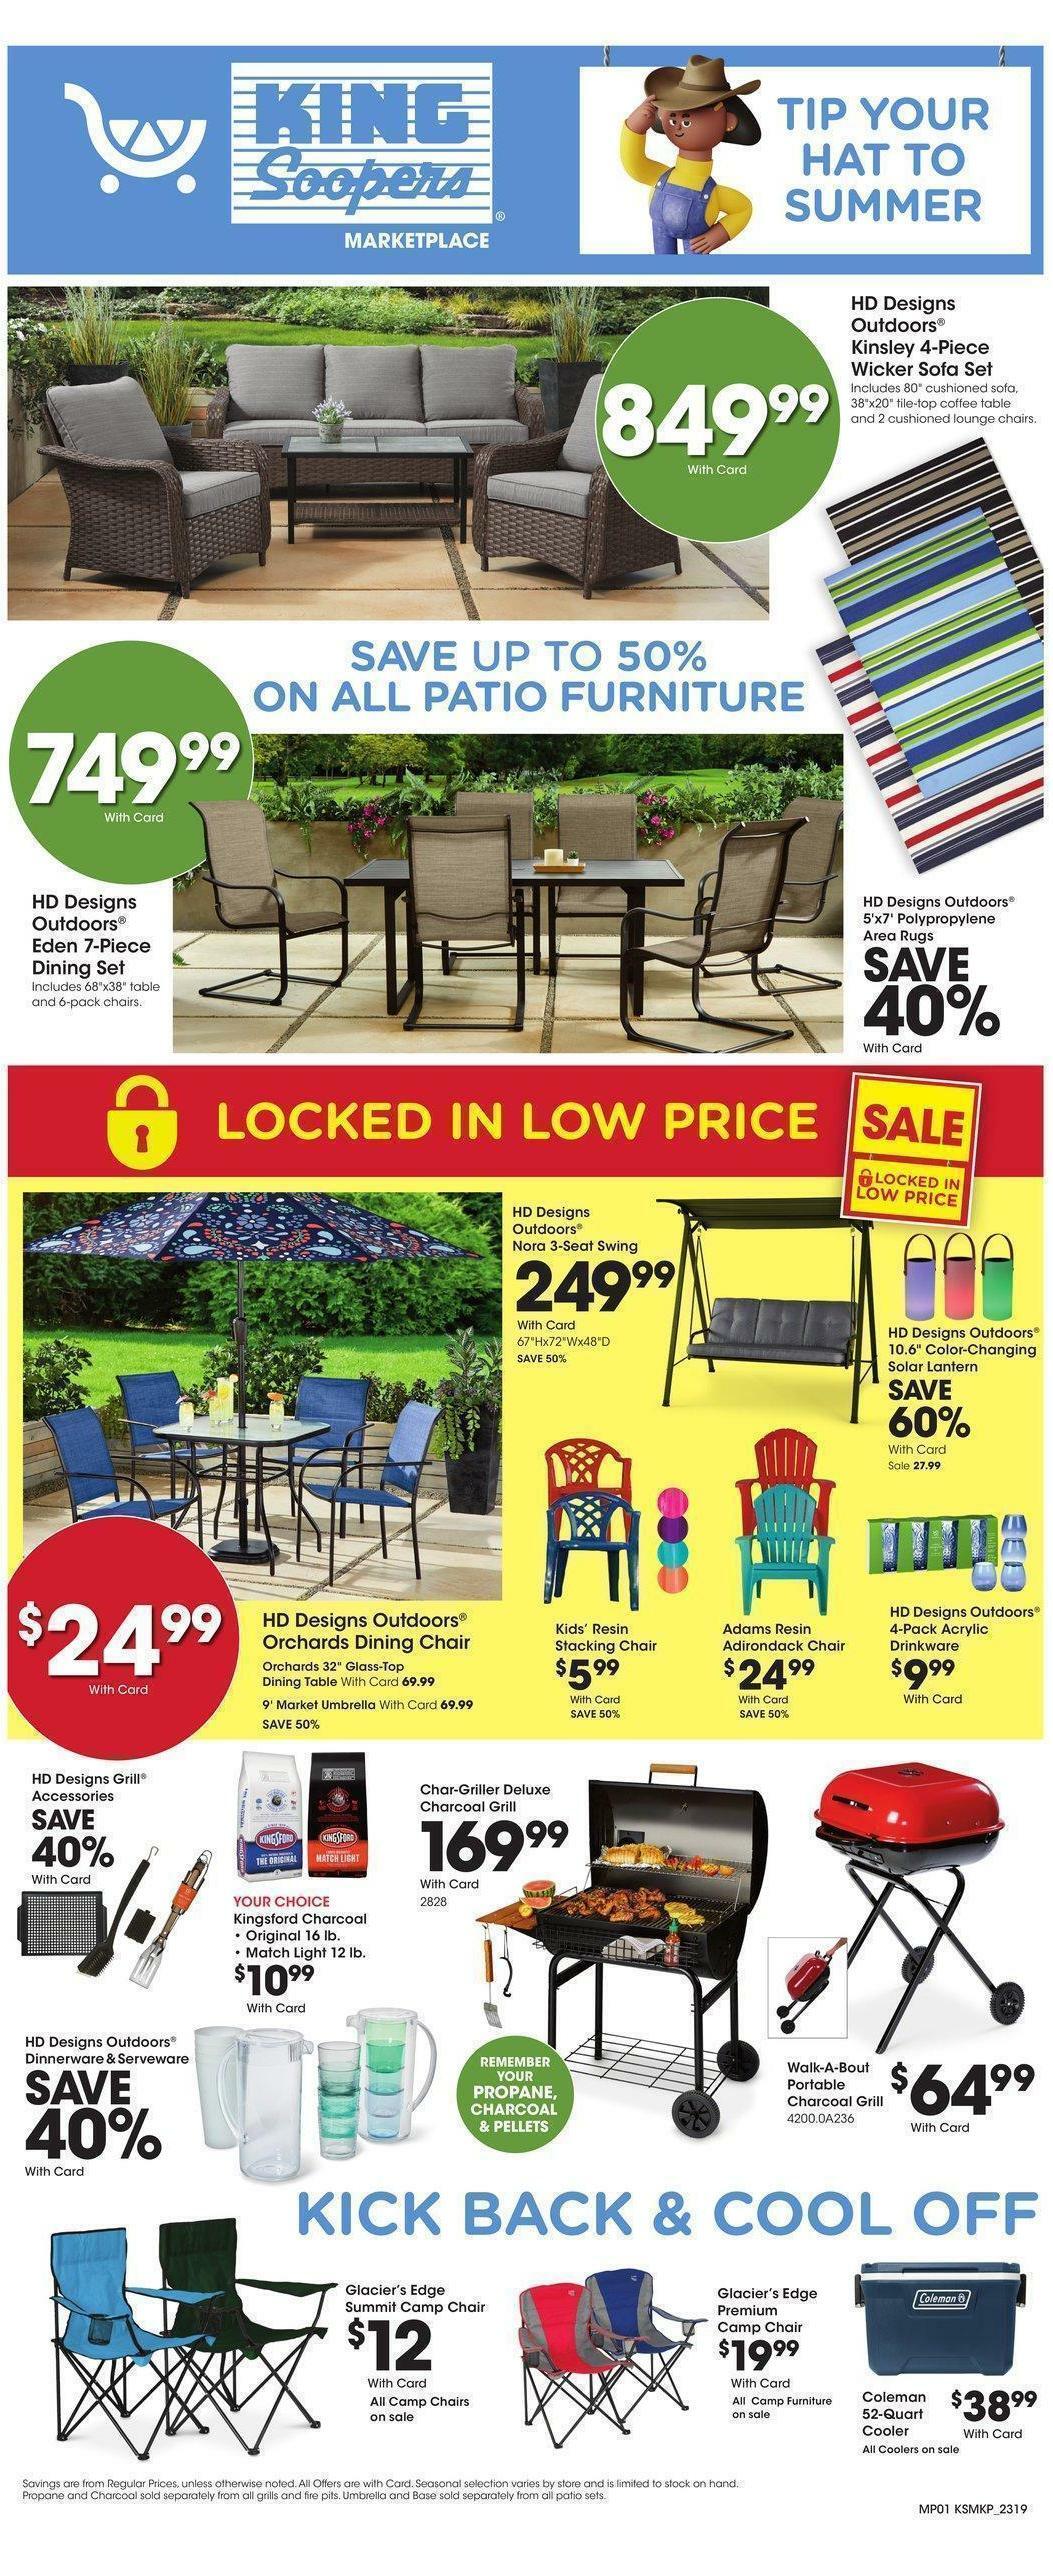 King Soopers Summer Tip Weekly Ad from June 7